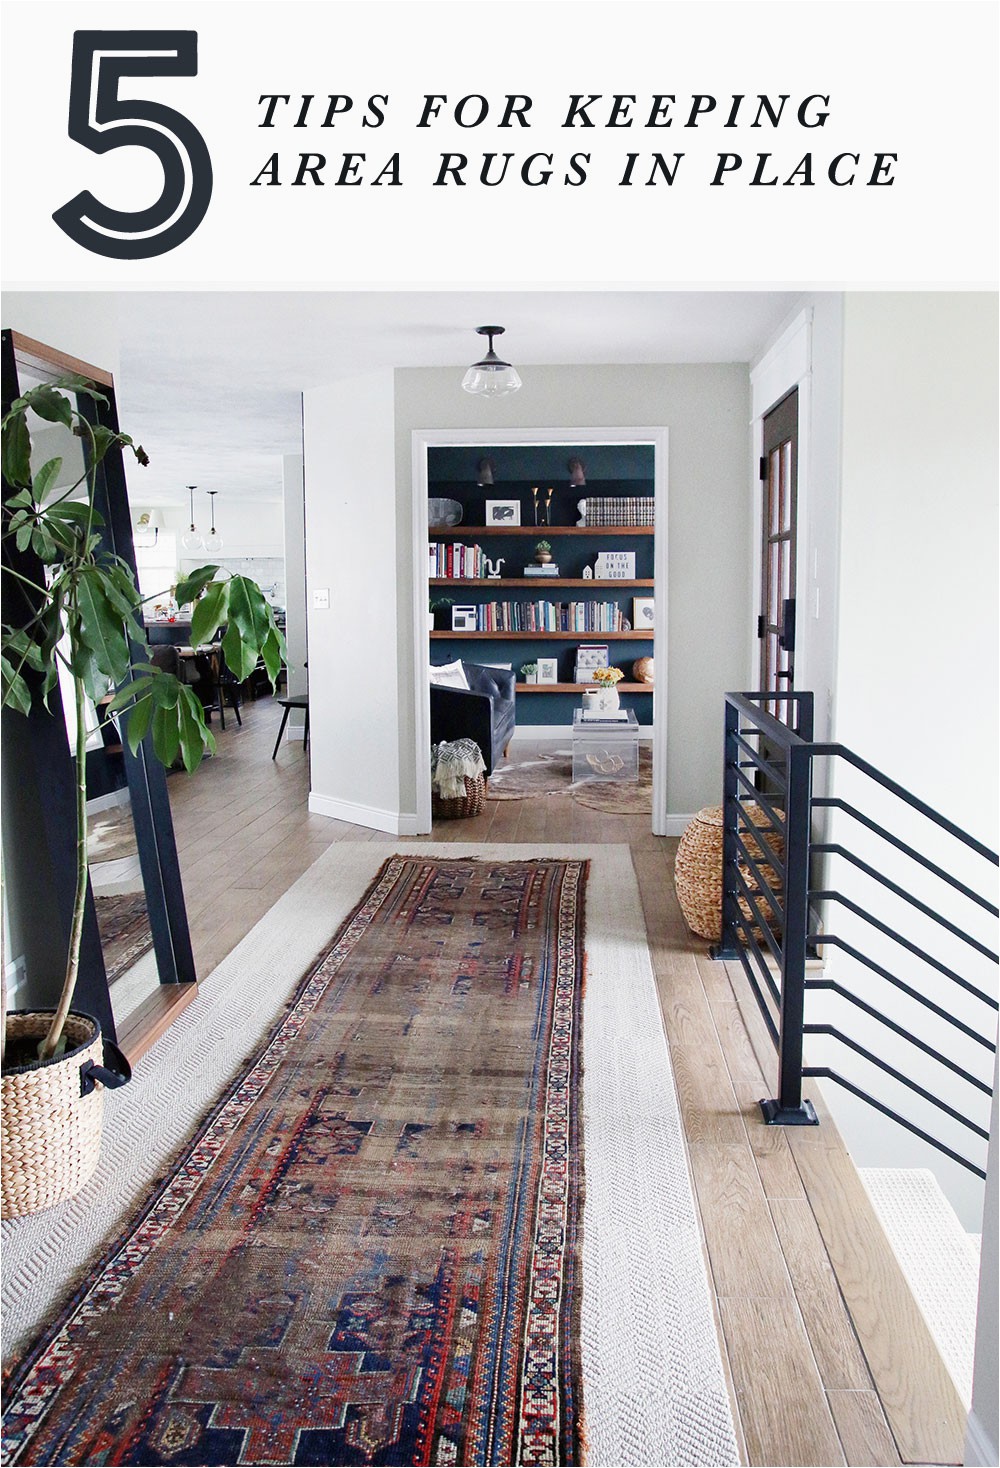 Area Rug Slips On Carpet 5 Tips for Keeping area Rugs Exactly where You Want them